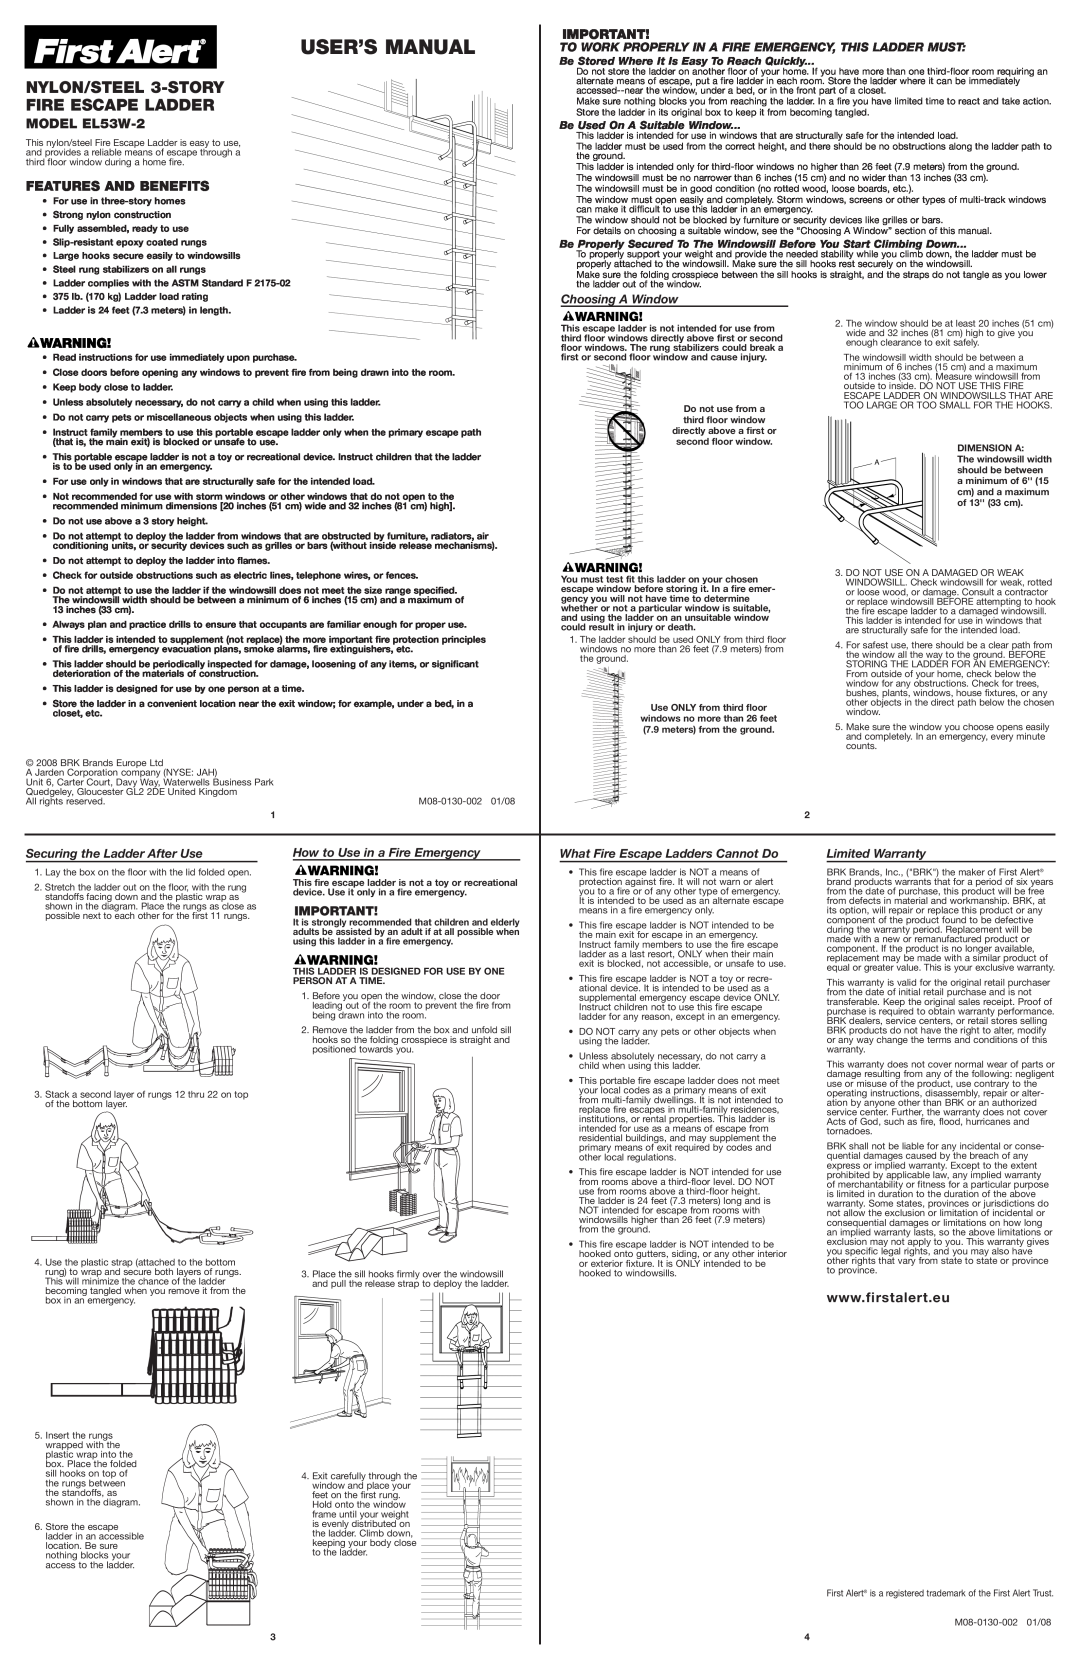 BRK electronic user manual NYLON/STEEL 3-STORY, Fire Escape Ladder, MODEL EL53W-2, Features And Benefits 